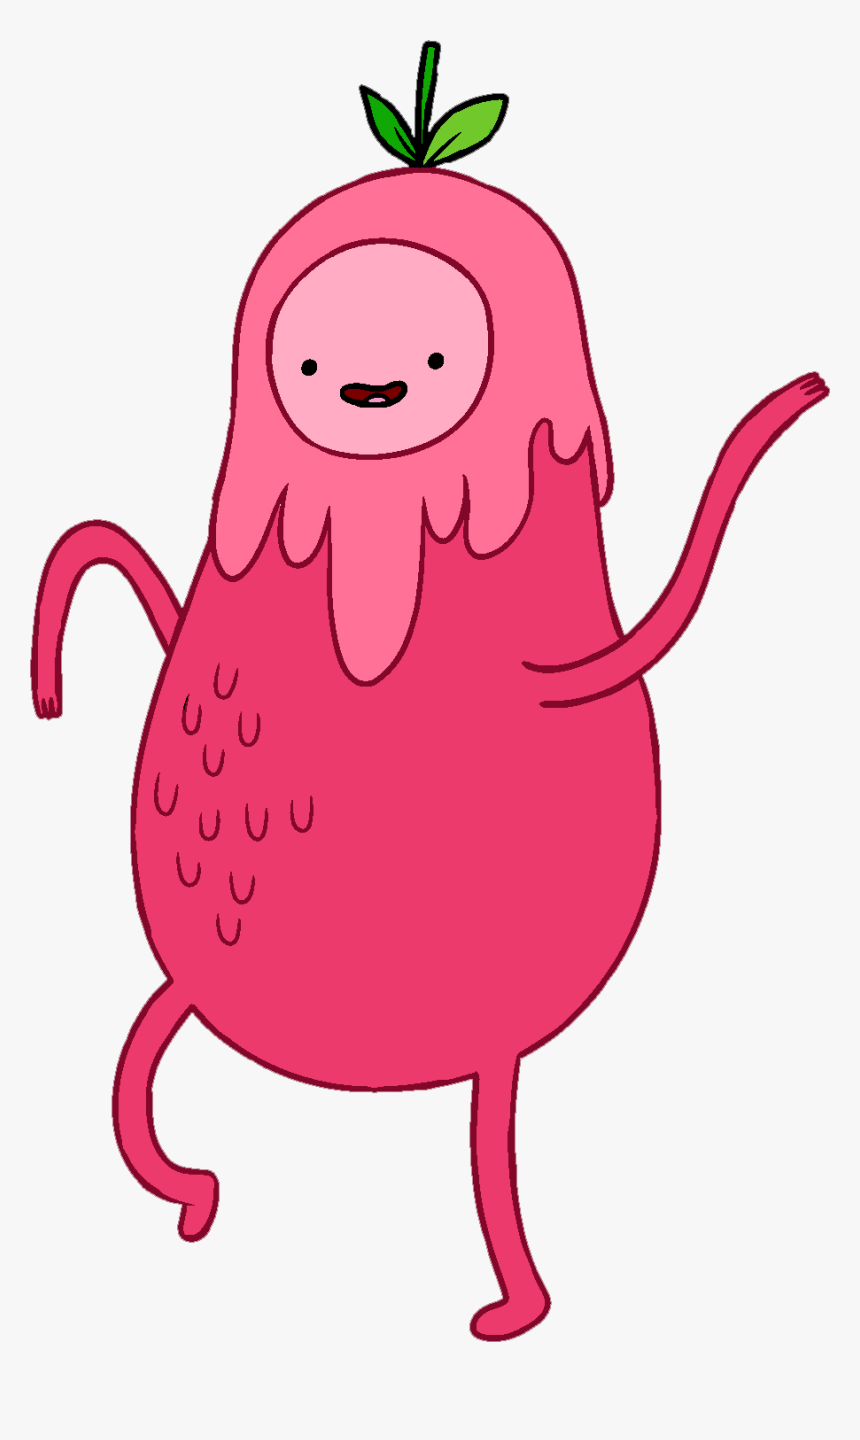 Adventure Time Pink Fruit - Sticker Adventure Time Png, Transparent Png, Free Download